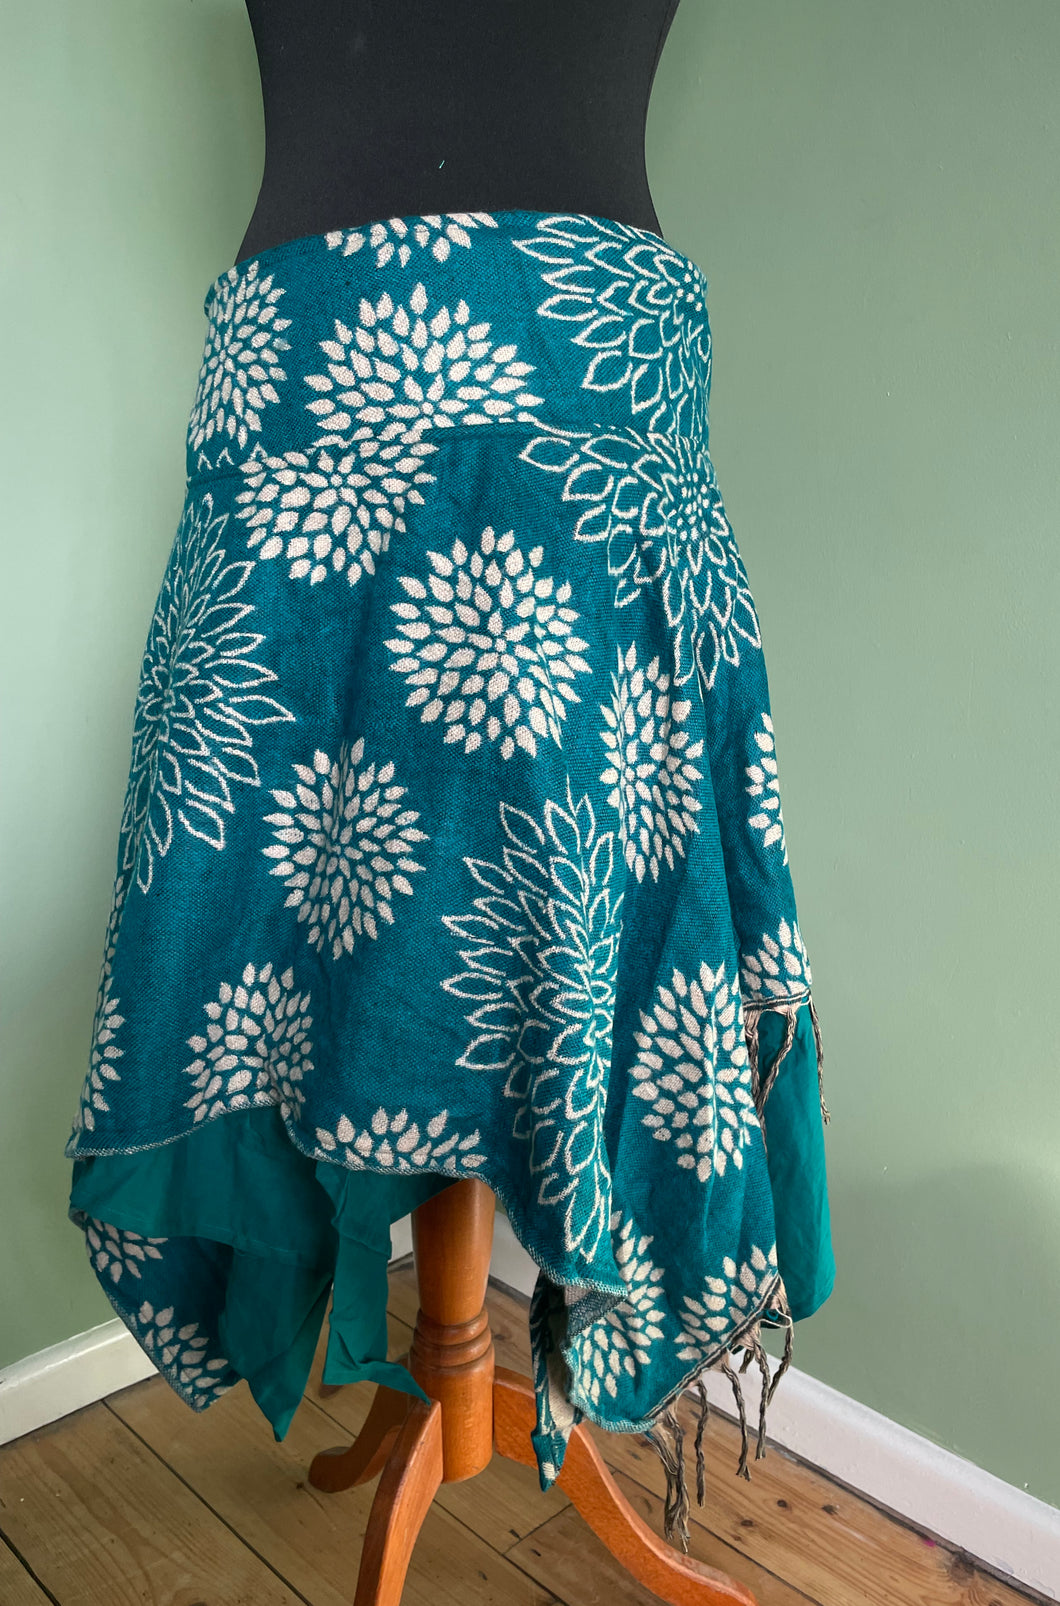 Buy now online from Emma's Emporium! Ethical slow happy festival fashion, women's clothing wholesale,. Warm winter fleece wrap fairy skirt, with cotton lining. Reversible, bold flower print. machine washable bold flower print design.